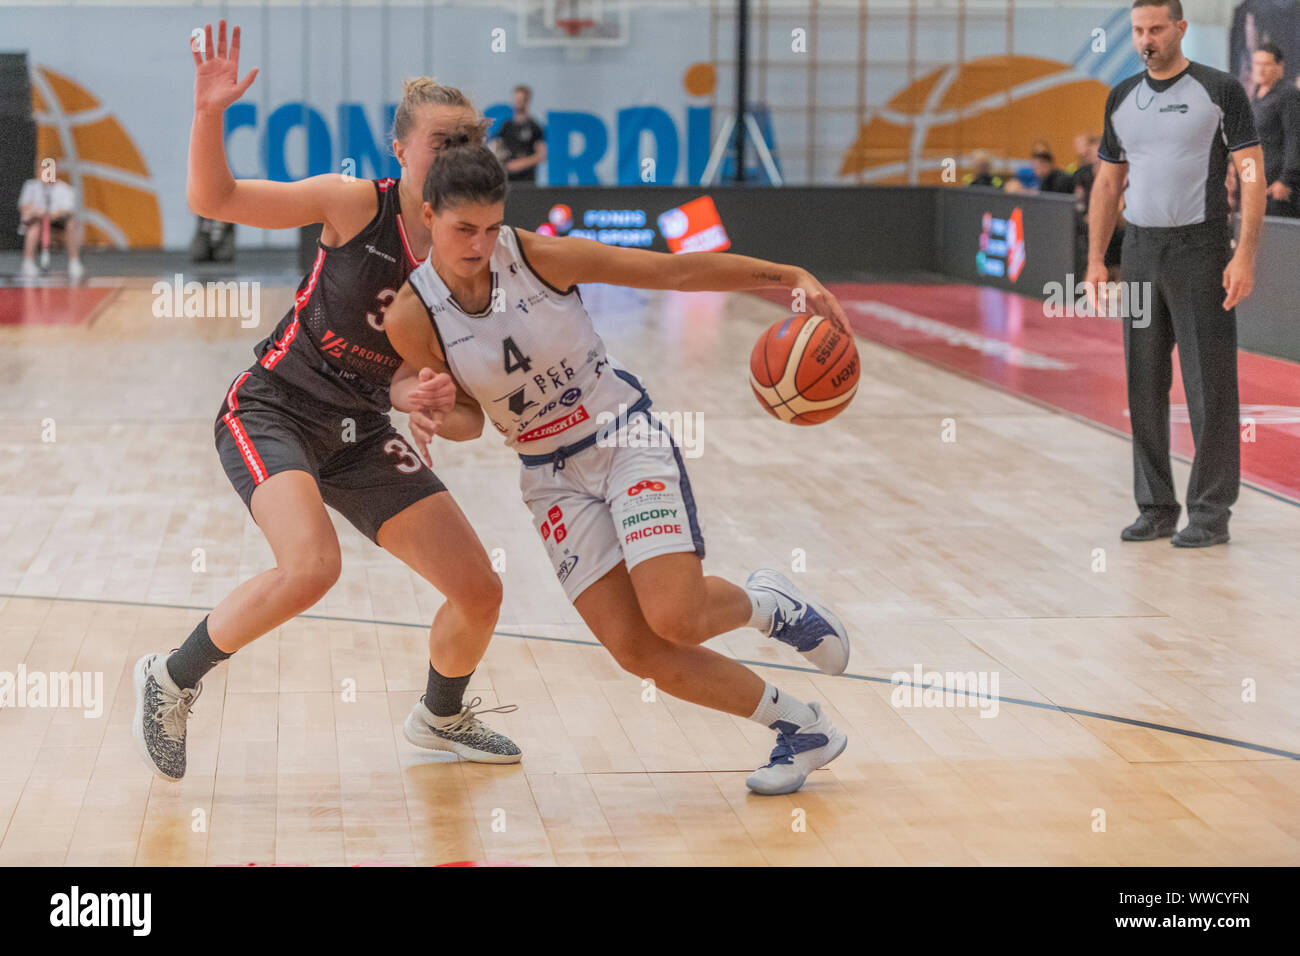 Yverdon Les Bains, Switzerland. 14th Sep, 2019. Fora Nancy (R) during BCF ELFIC Fribourg victory over BC Winterthur (73-63) in the Final win at the Super Cup 2019 at the Yverdon-les-Bains Sports Center (Switzerland) (Photo by Eric Dubost/Pacific Press) Credit: Pacific Press Agency/Alamy Live News Stock Photo